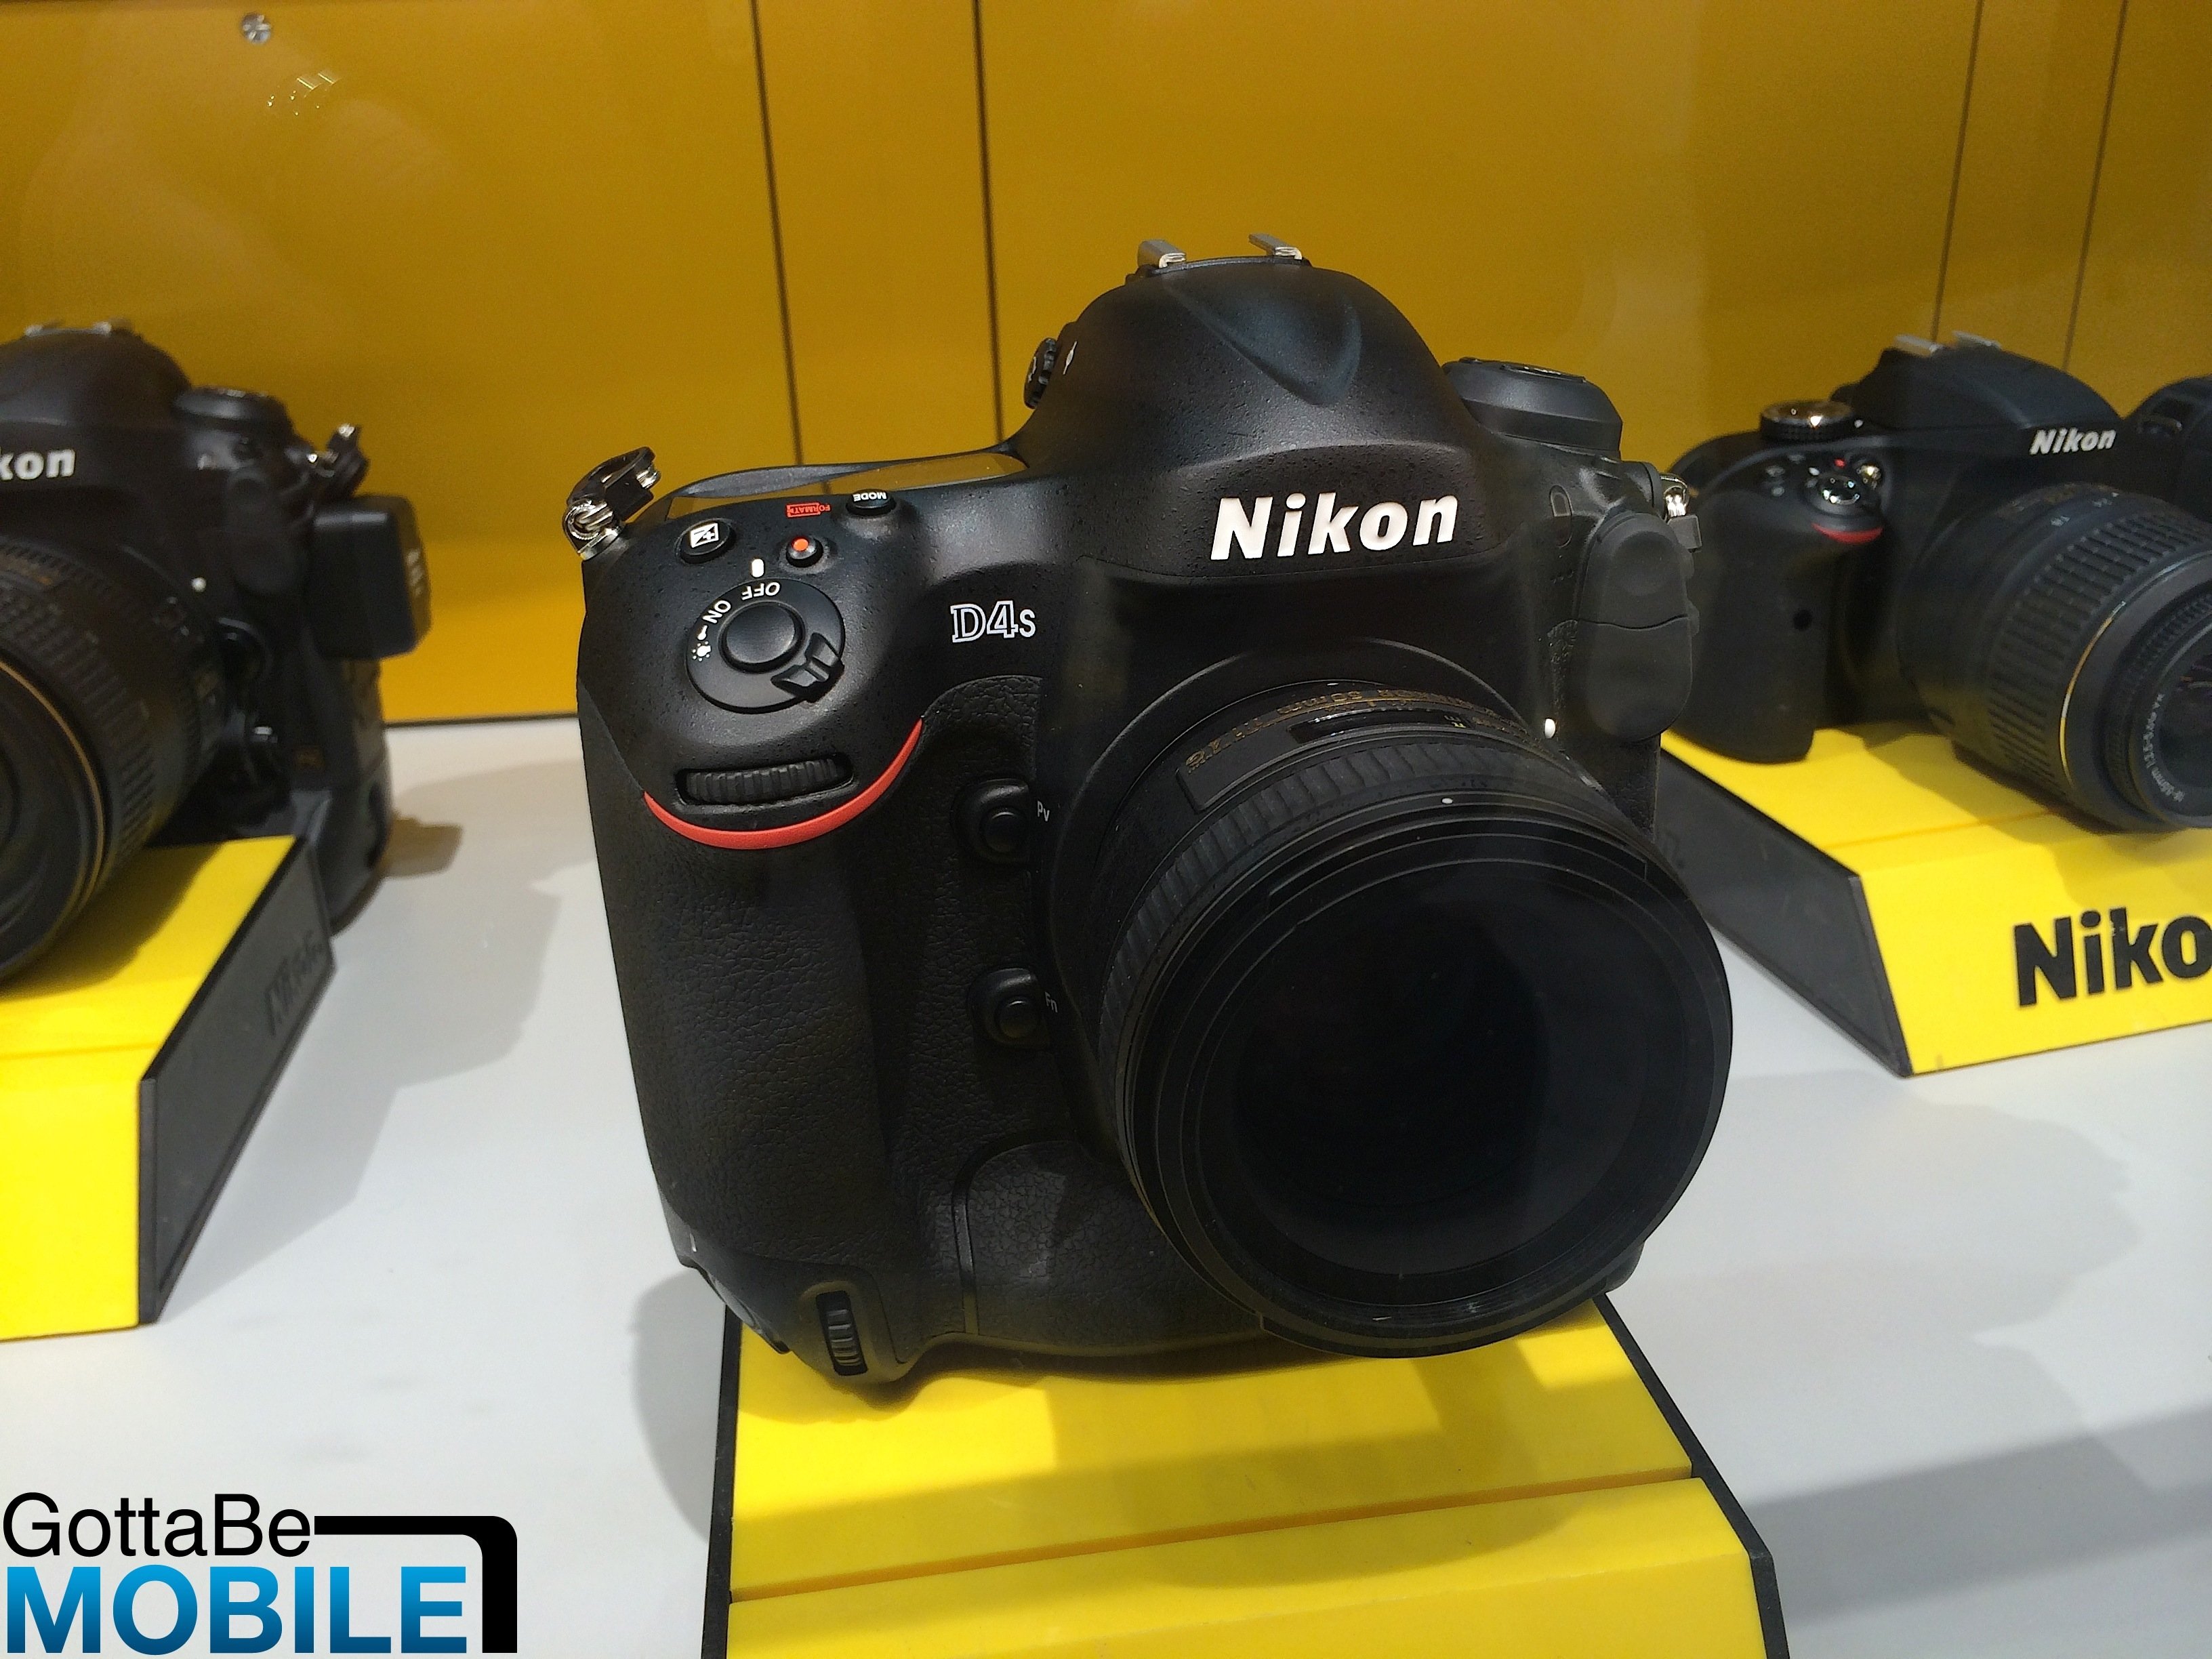 Nikon D4s sample images appear at the 2014 Olympics in Sochi.